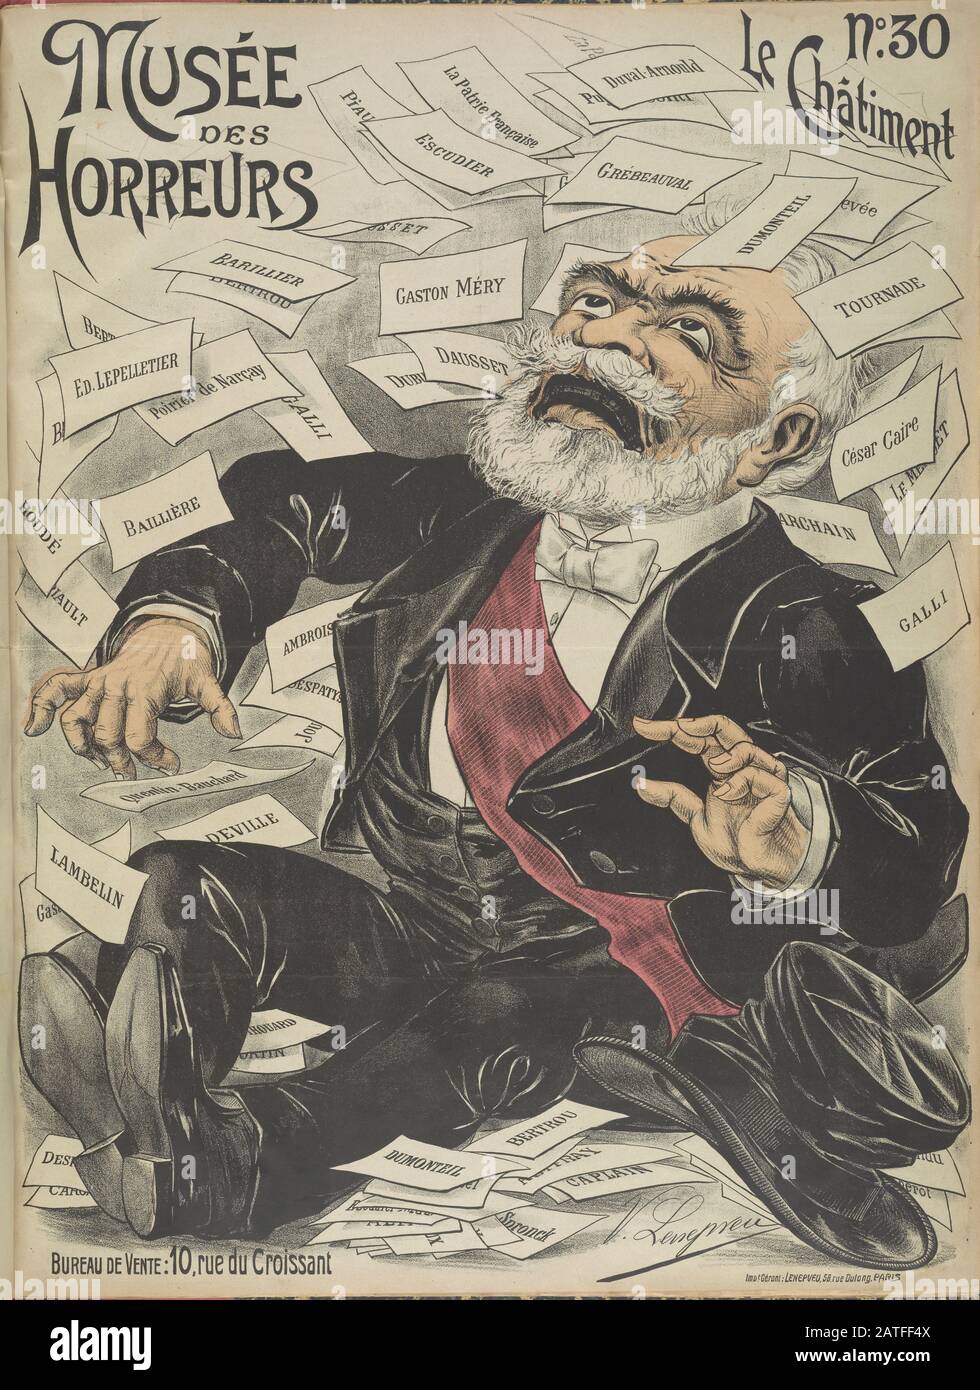 Musée des Horreurs -  No. 30 Le Châtiment  -  1899  -  Lenepveu, V.  -  Caricature of Émile Loubet (1838-1929) being snowed under with namecards. Loubet became President of France in 1899 and promoted Dreyfus' innocence, eventually remitting Dreyfus' 10-year imprisonment sentence. Hand colored. Stock Photo